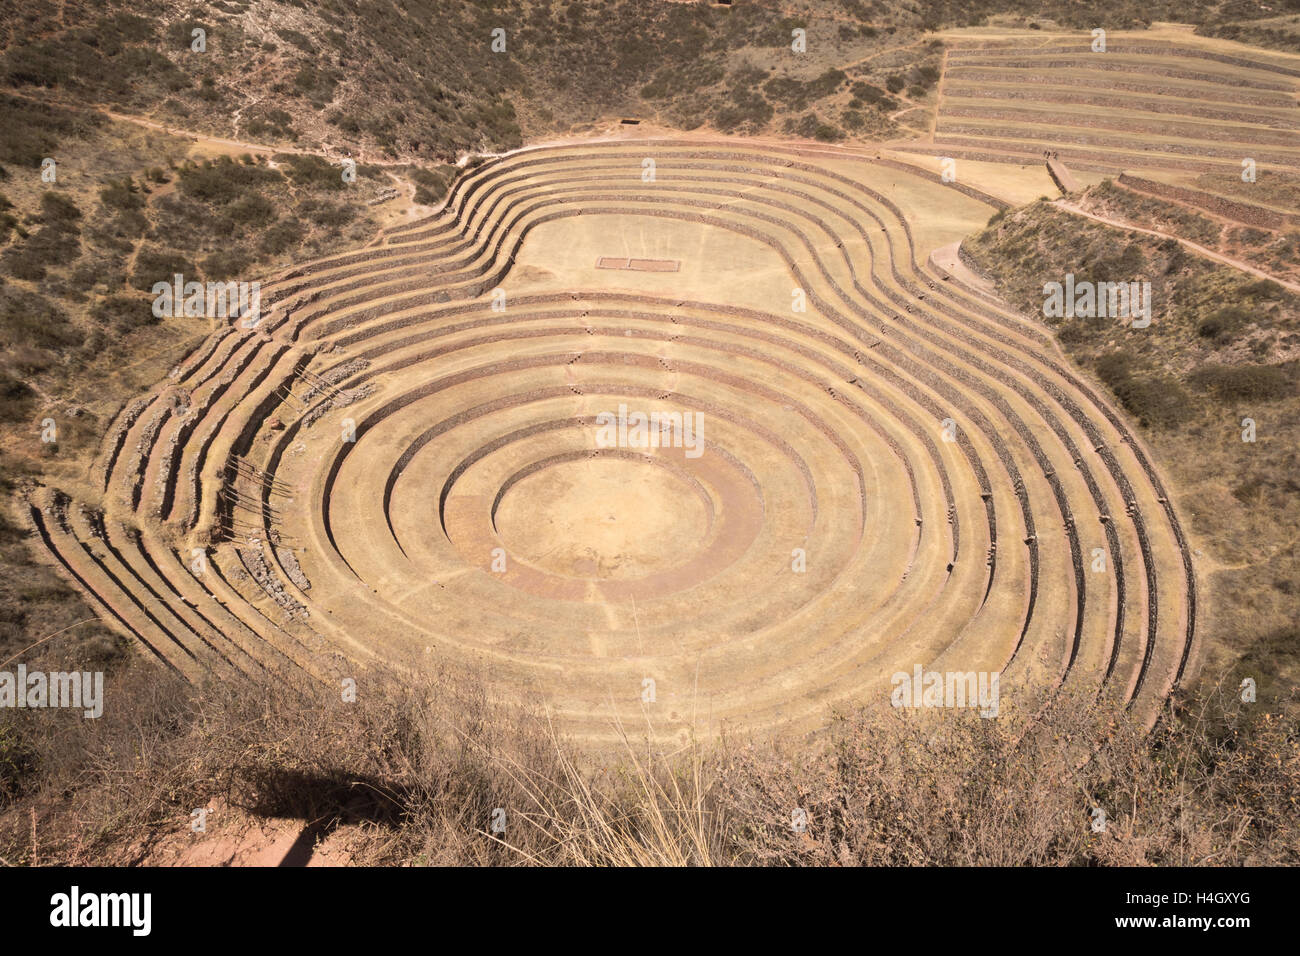 View of the largest concentric stone farming terrace formation at Moray Archaeological Sight near Cusco, Peru Stock Photo